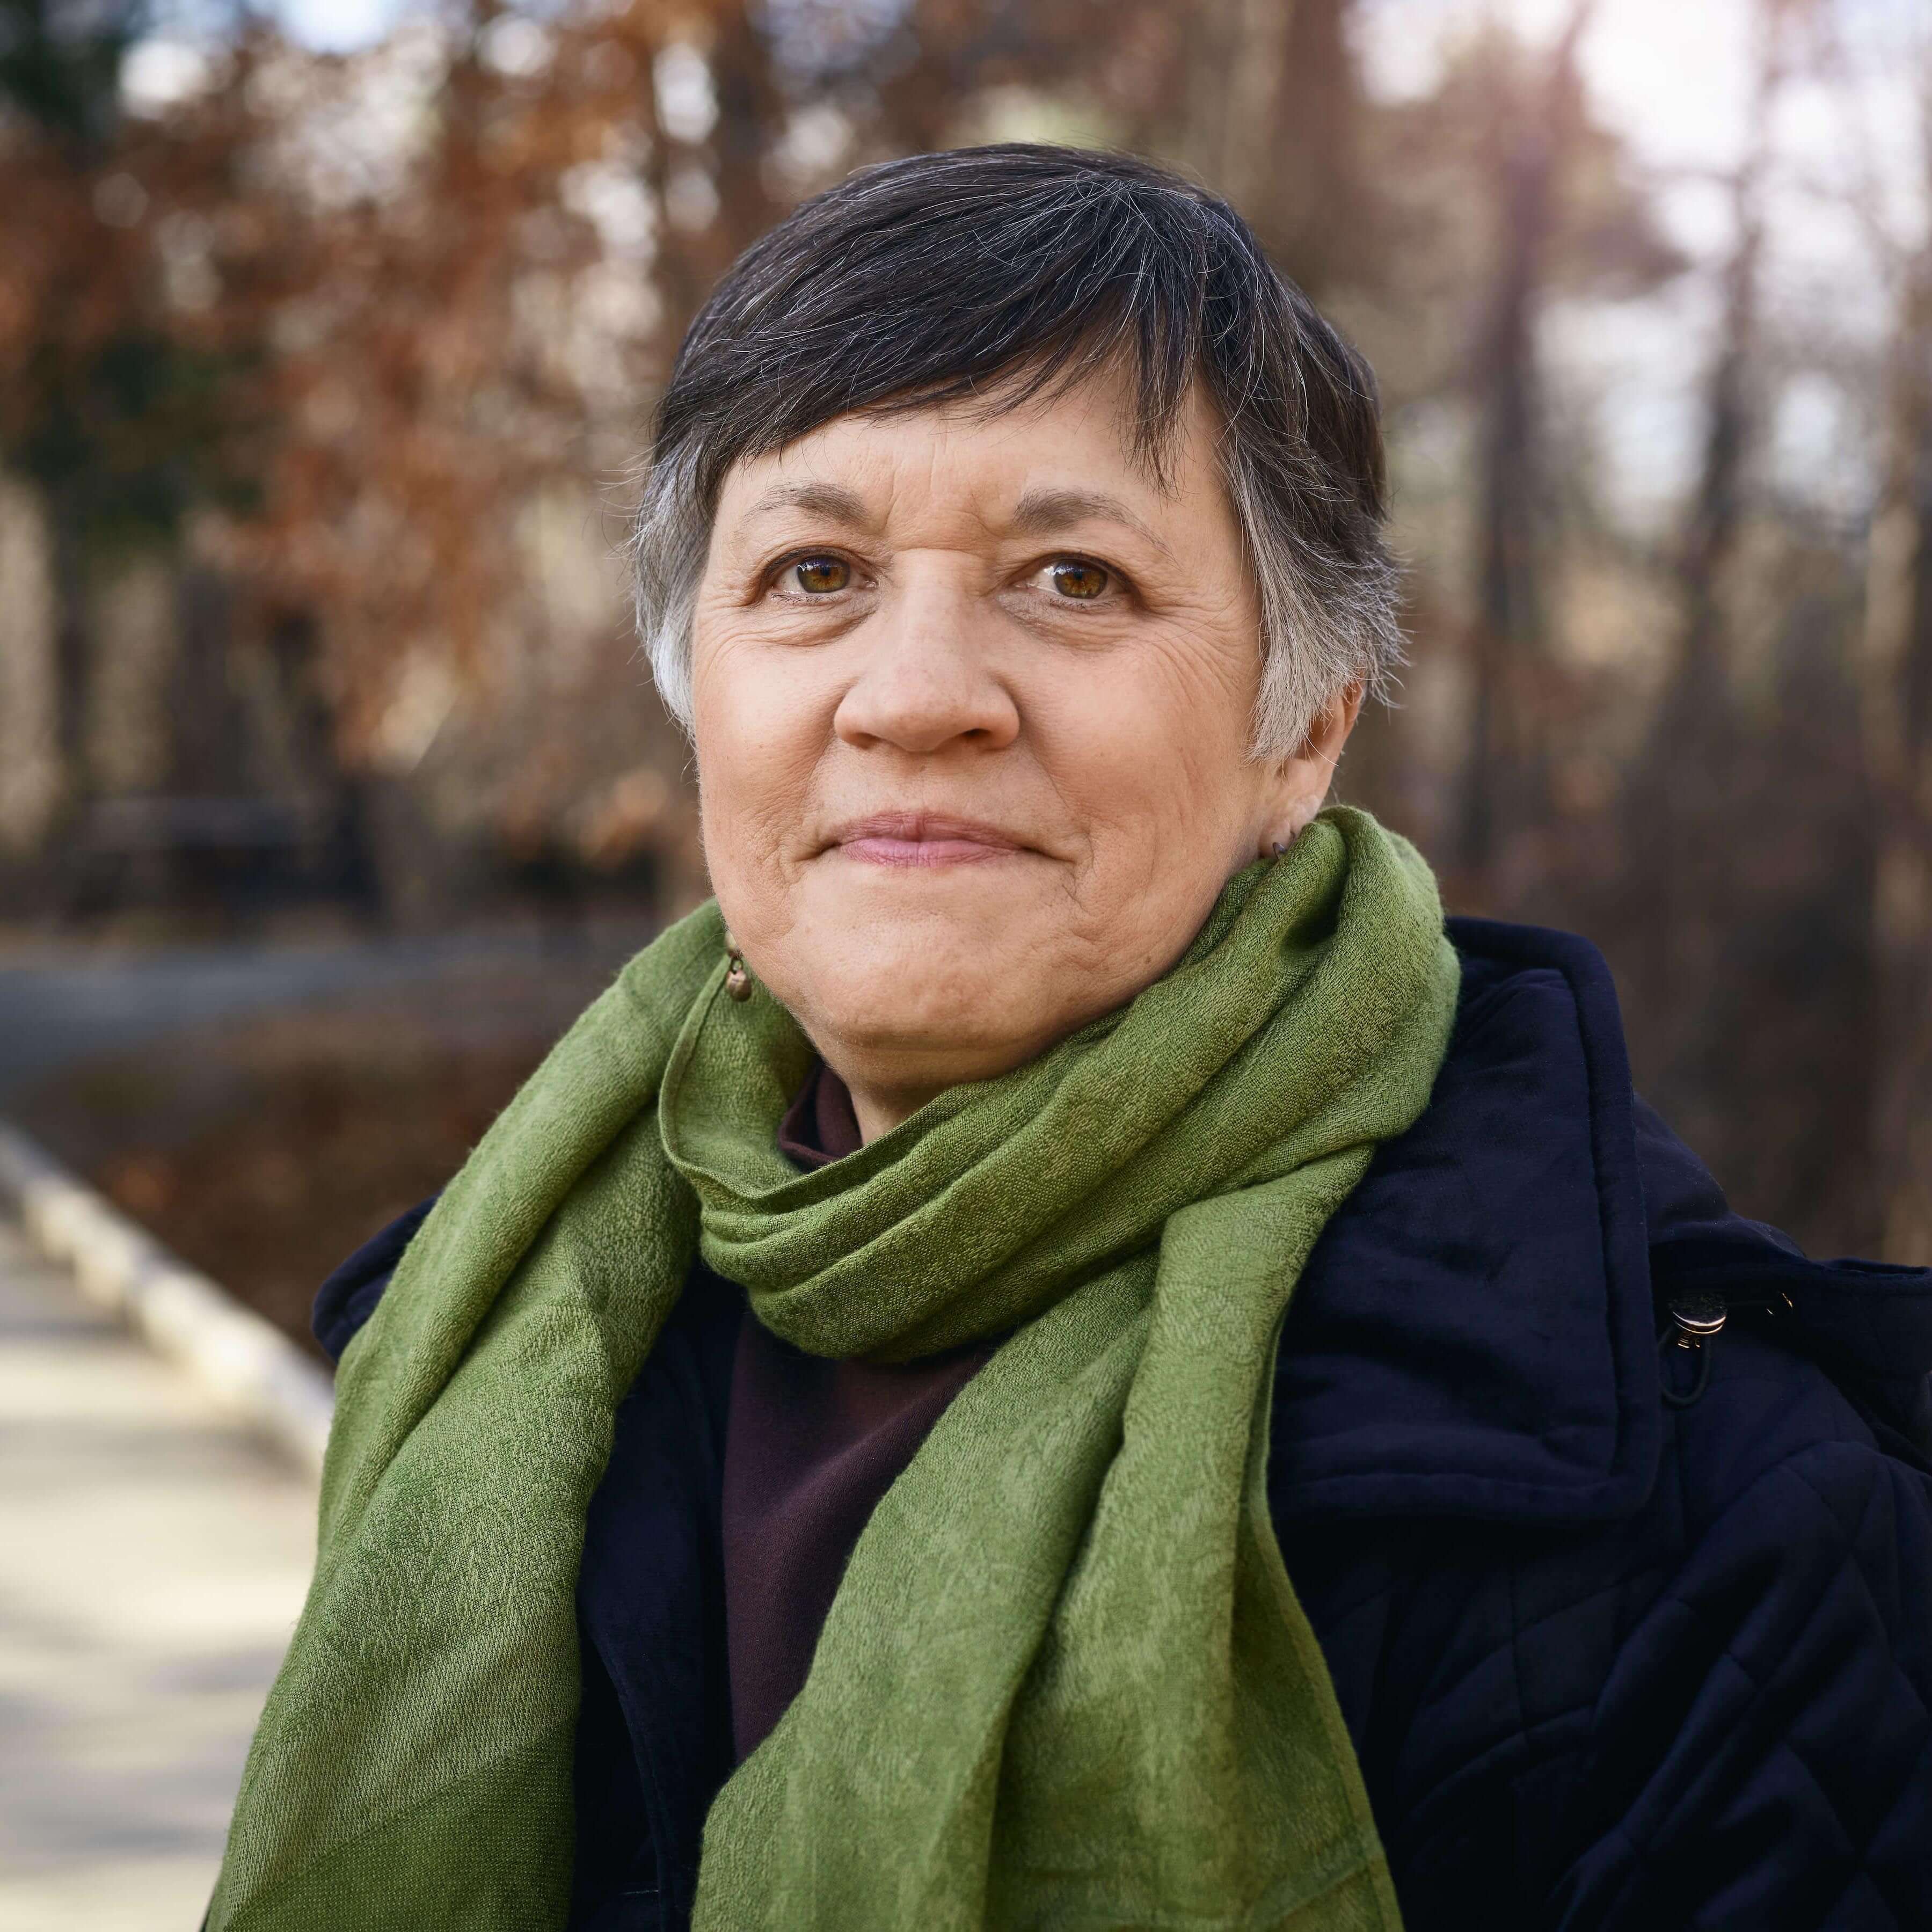 Portrait of woman outdoors with green scarf.